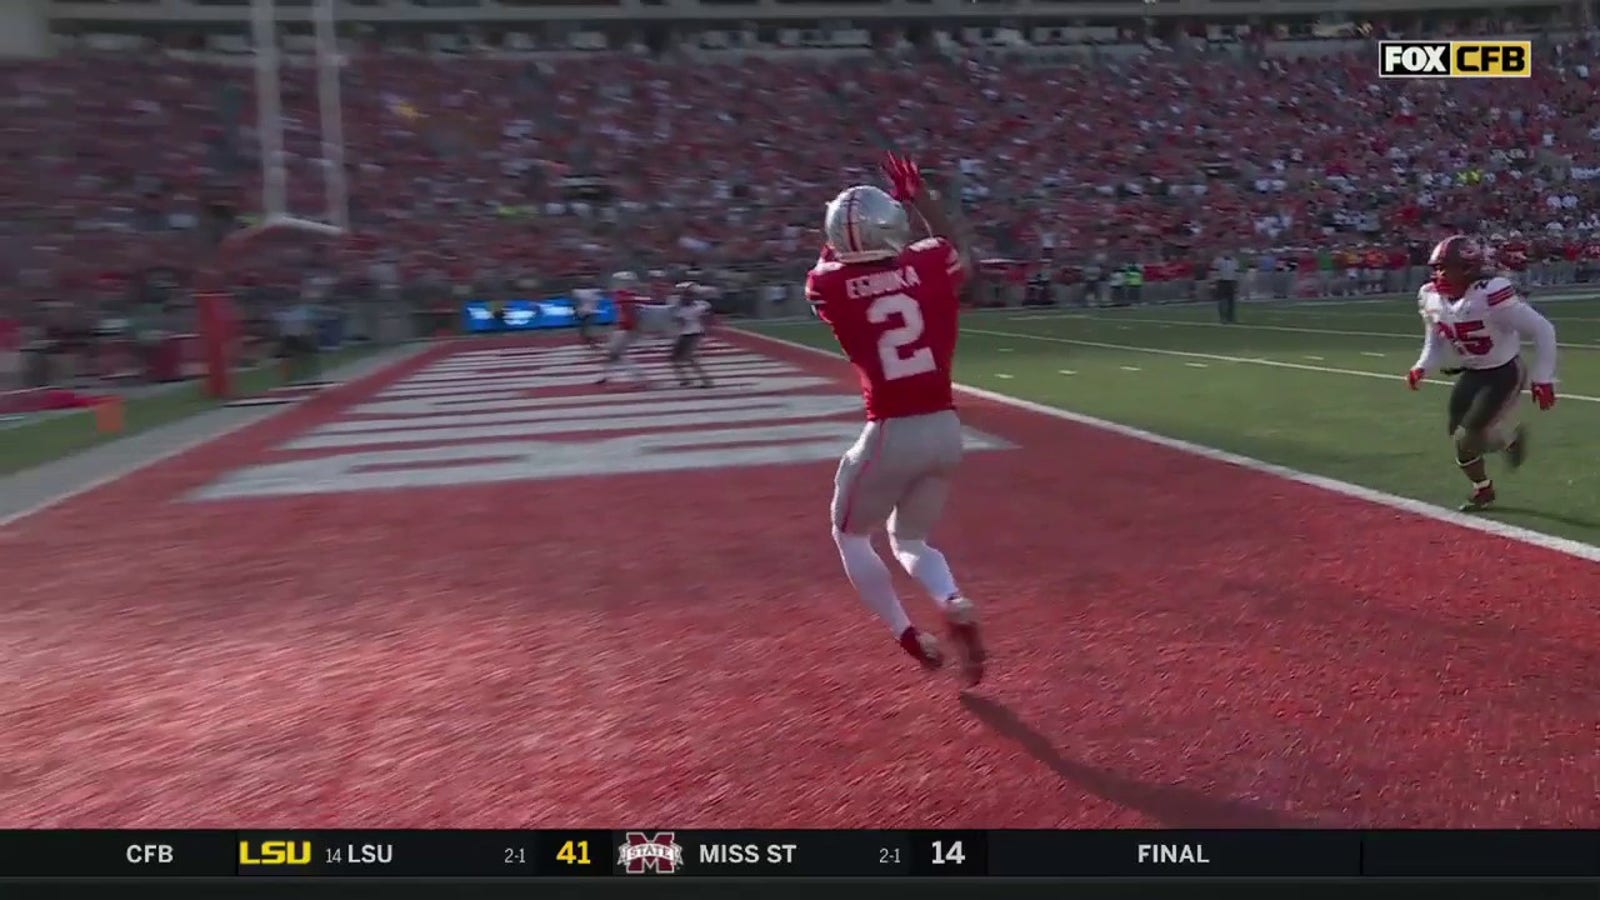 Emeka Egbuka scores his second TD of the game as Ohio State extends lead against Western Kentucky